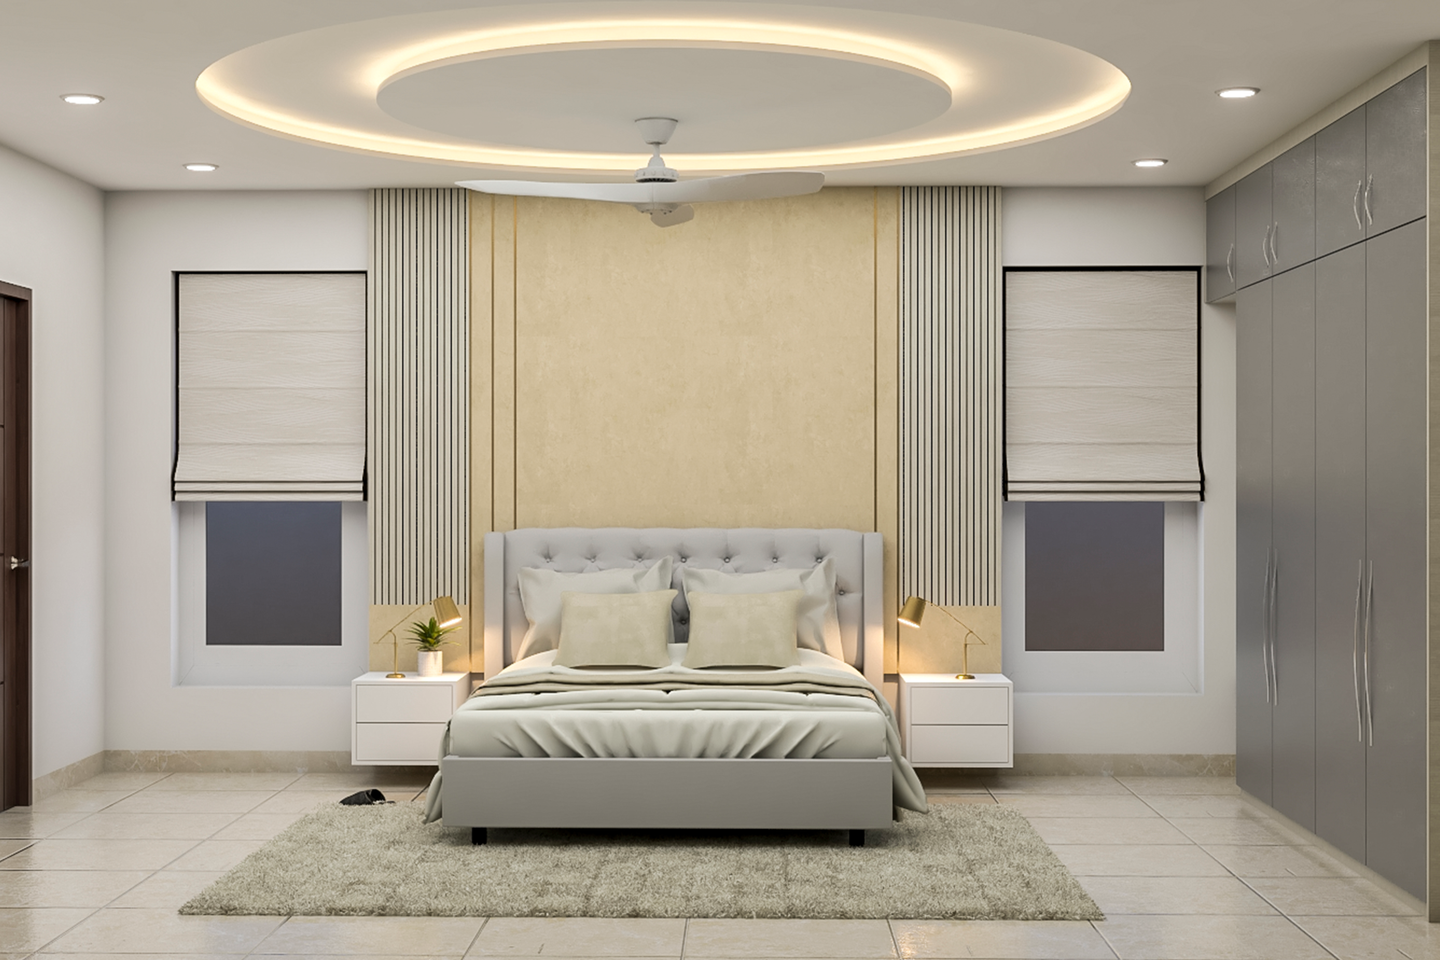 Circular Gypsum False Ceiling With Cove And Recessed Lights - Livspace